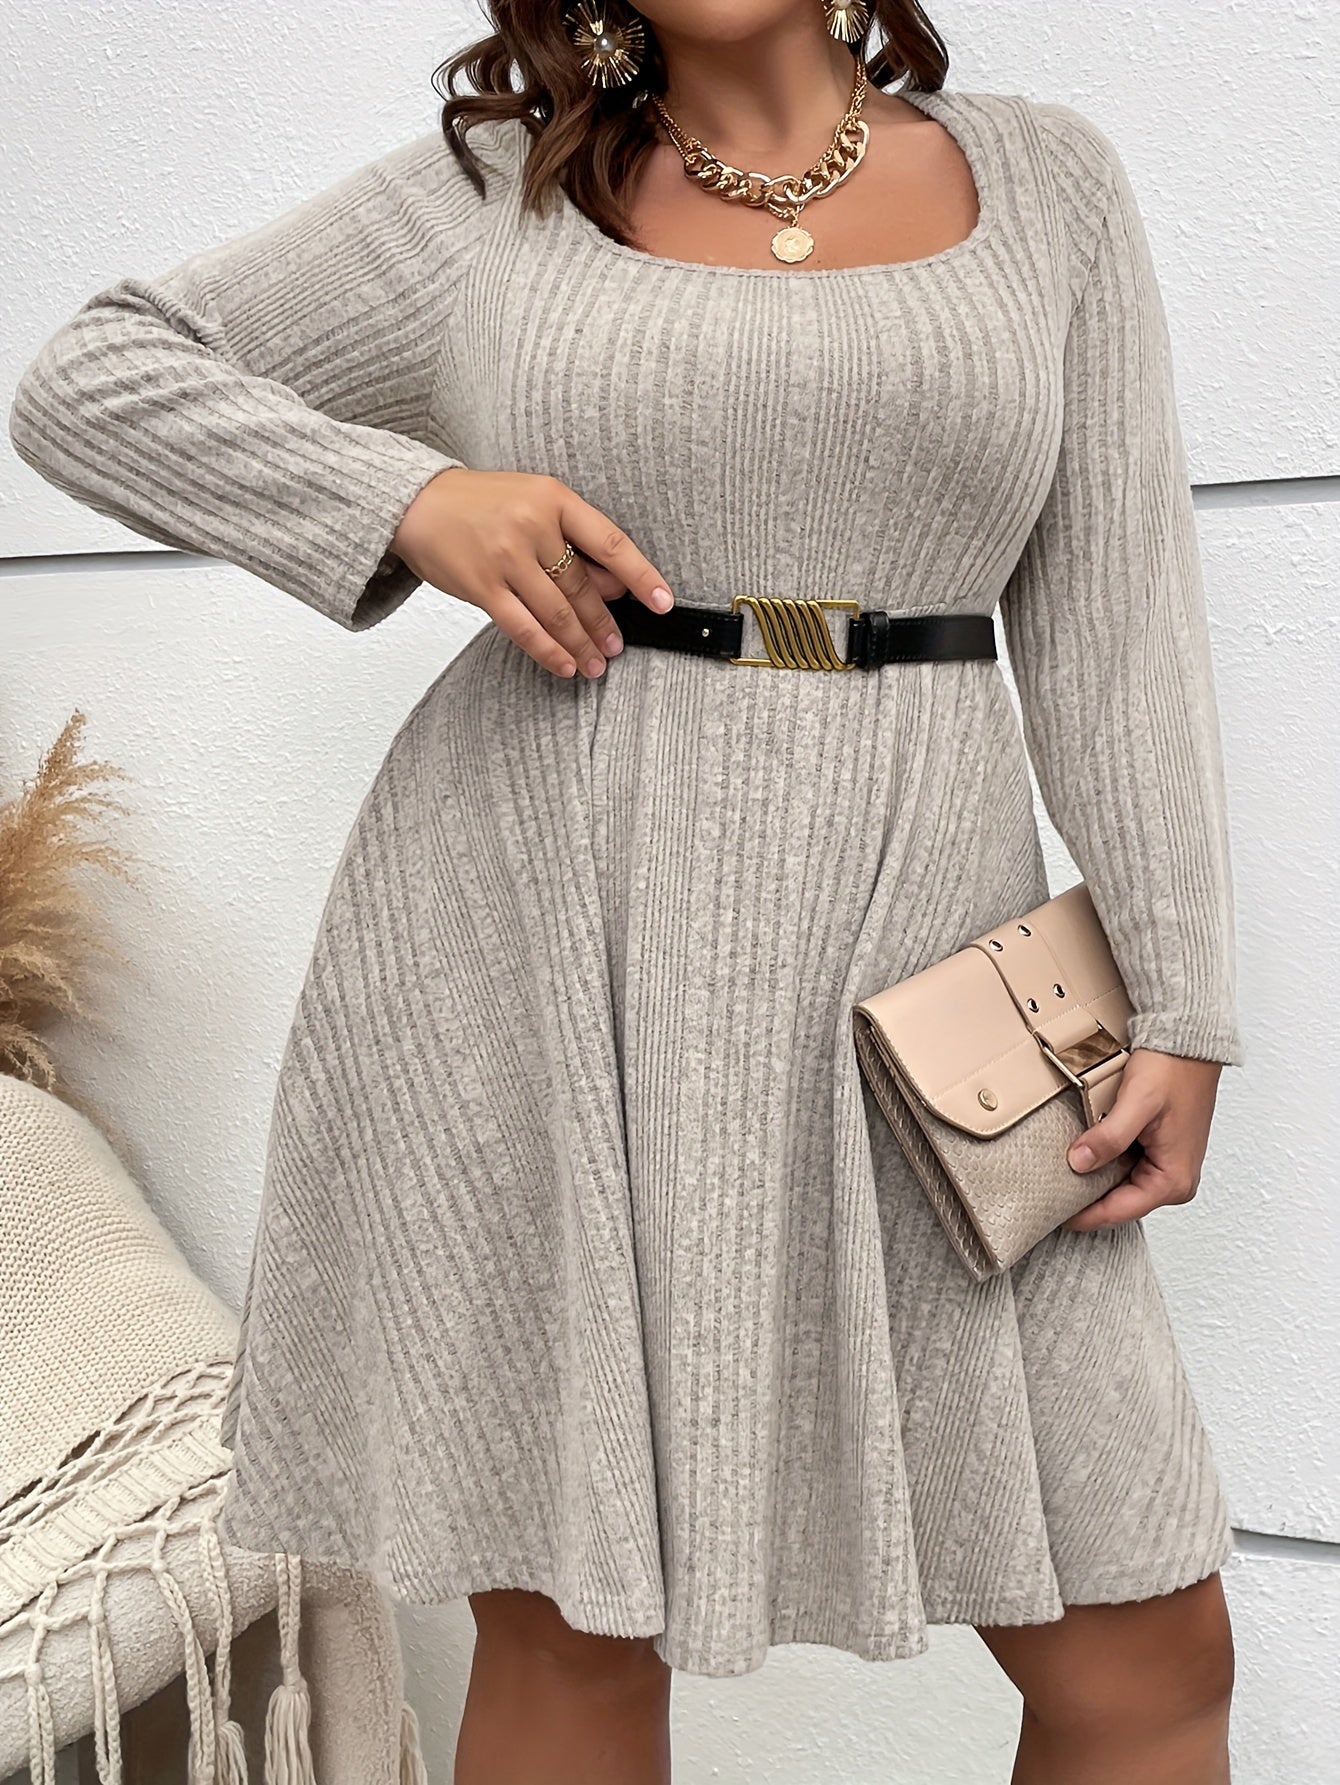 Antmvs Plus Size Casual Dress, Women's Plus Solid Ribbed Long Sleeve Round Neck Dress